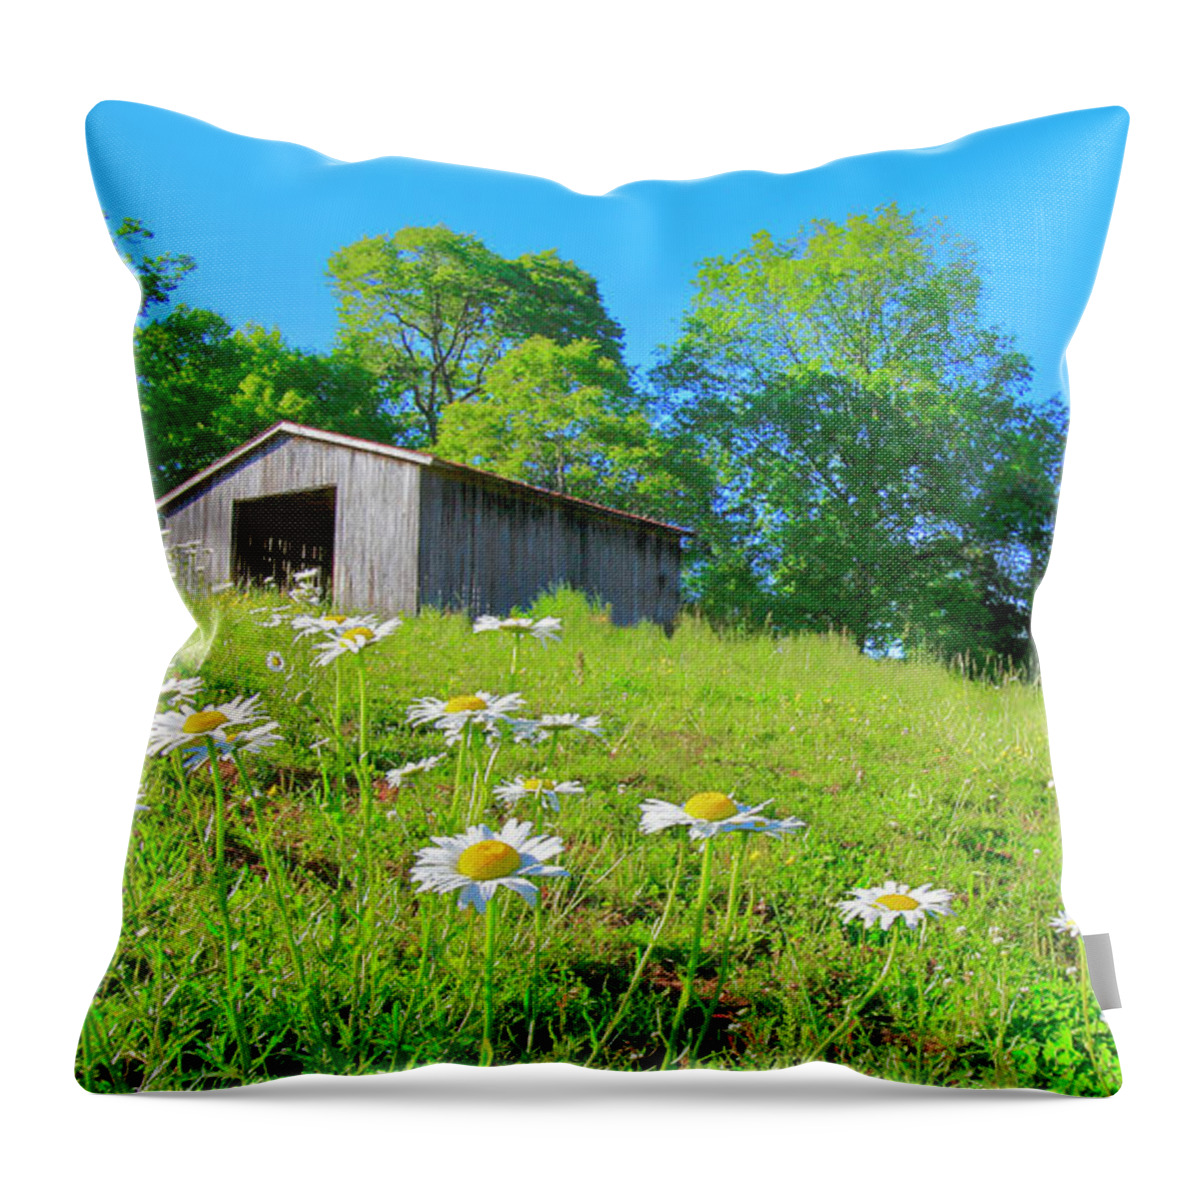 Barn Throw Pillow featuring the photograph Flowering Hillside Meadow - View 2 by The James Roney Collection